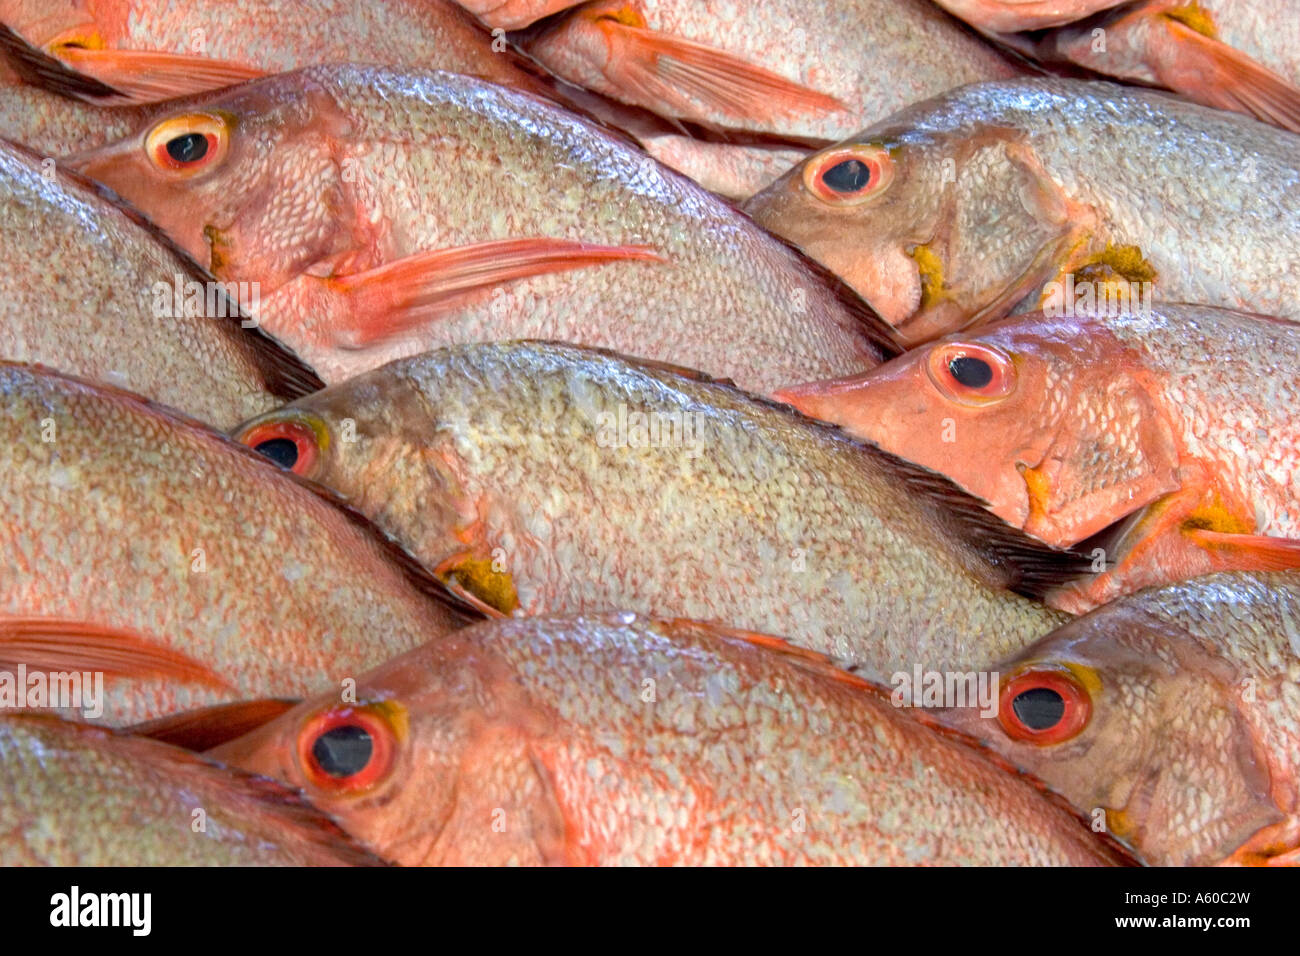 Display of fish at a market in Papeete on the island of Tahiti Stock Photo